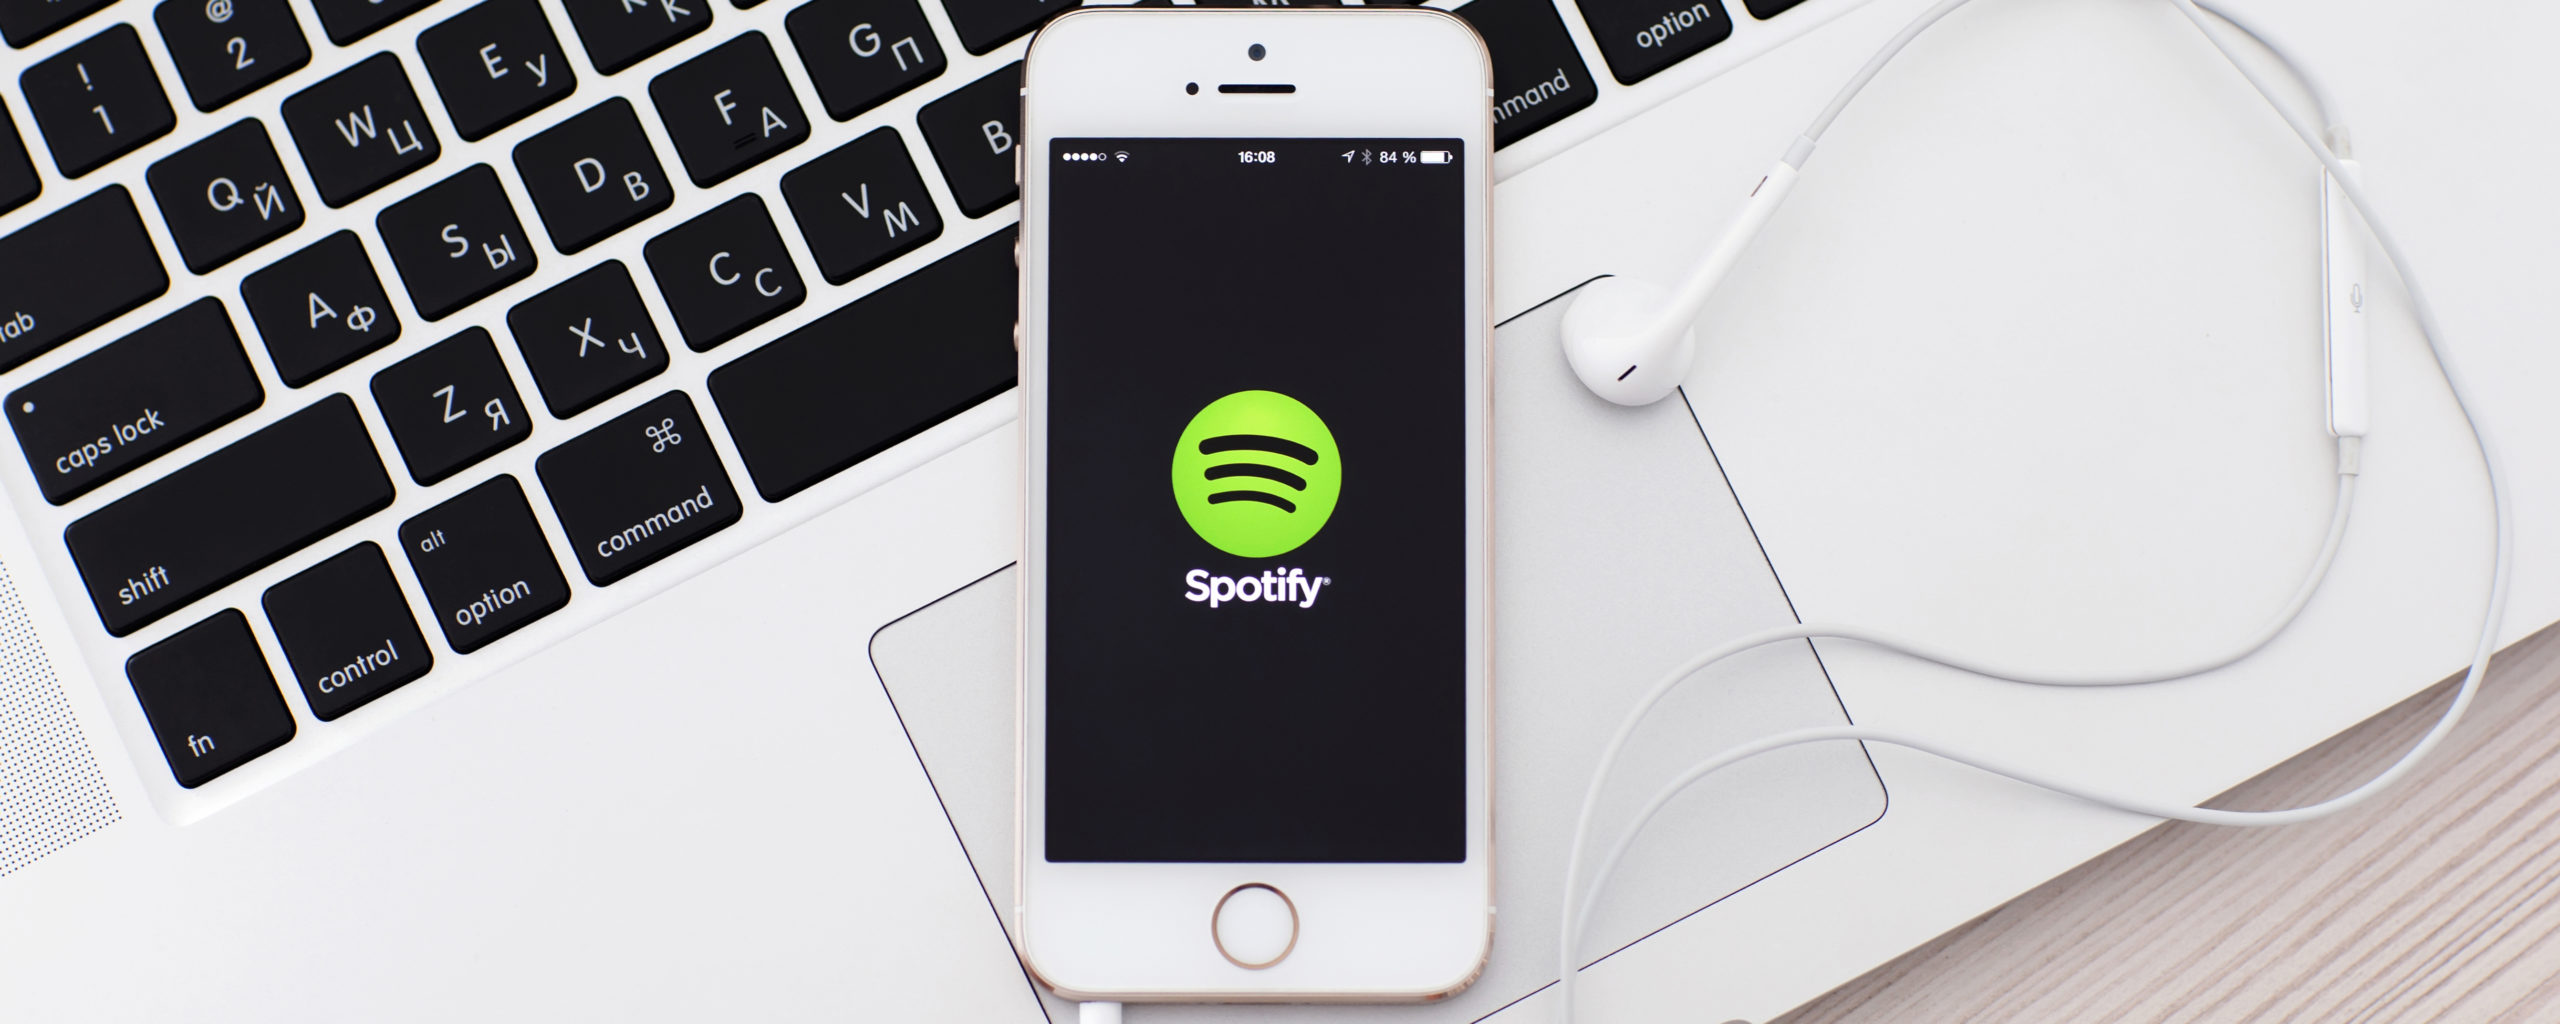 Download Spotify Songs To Apple Watch